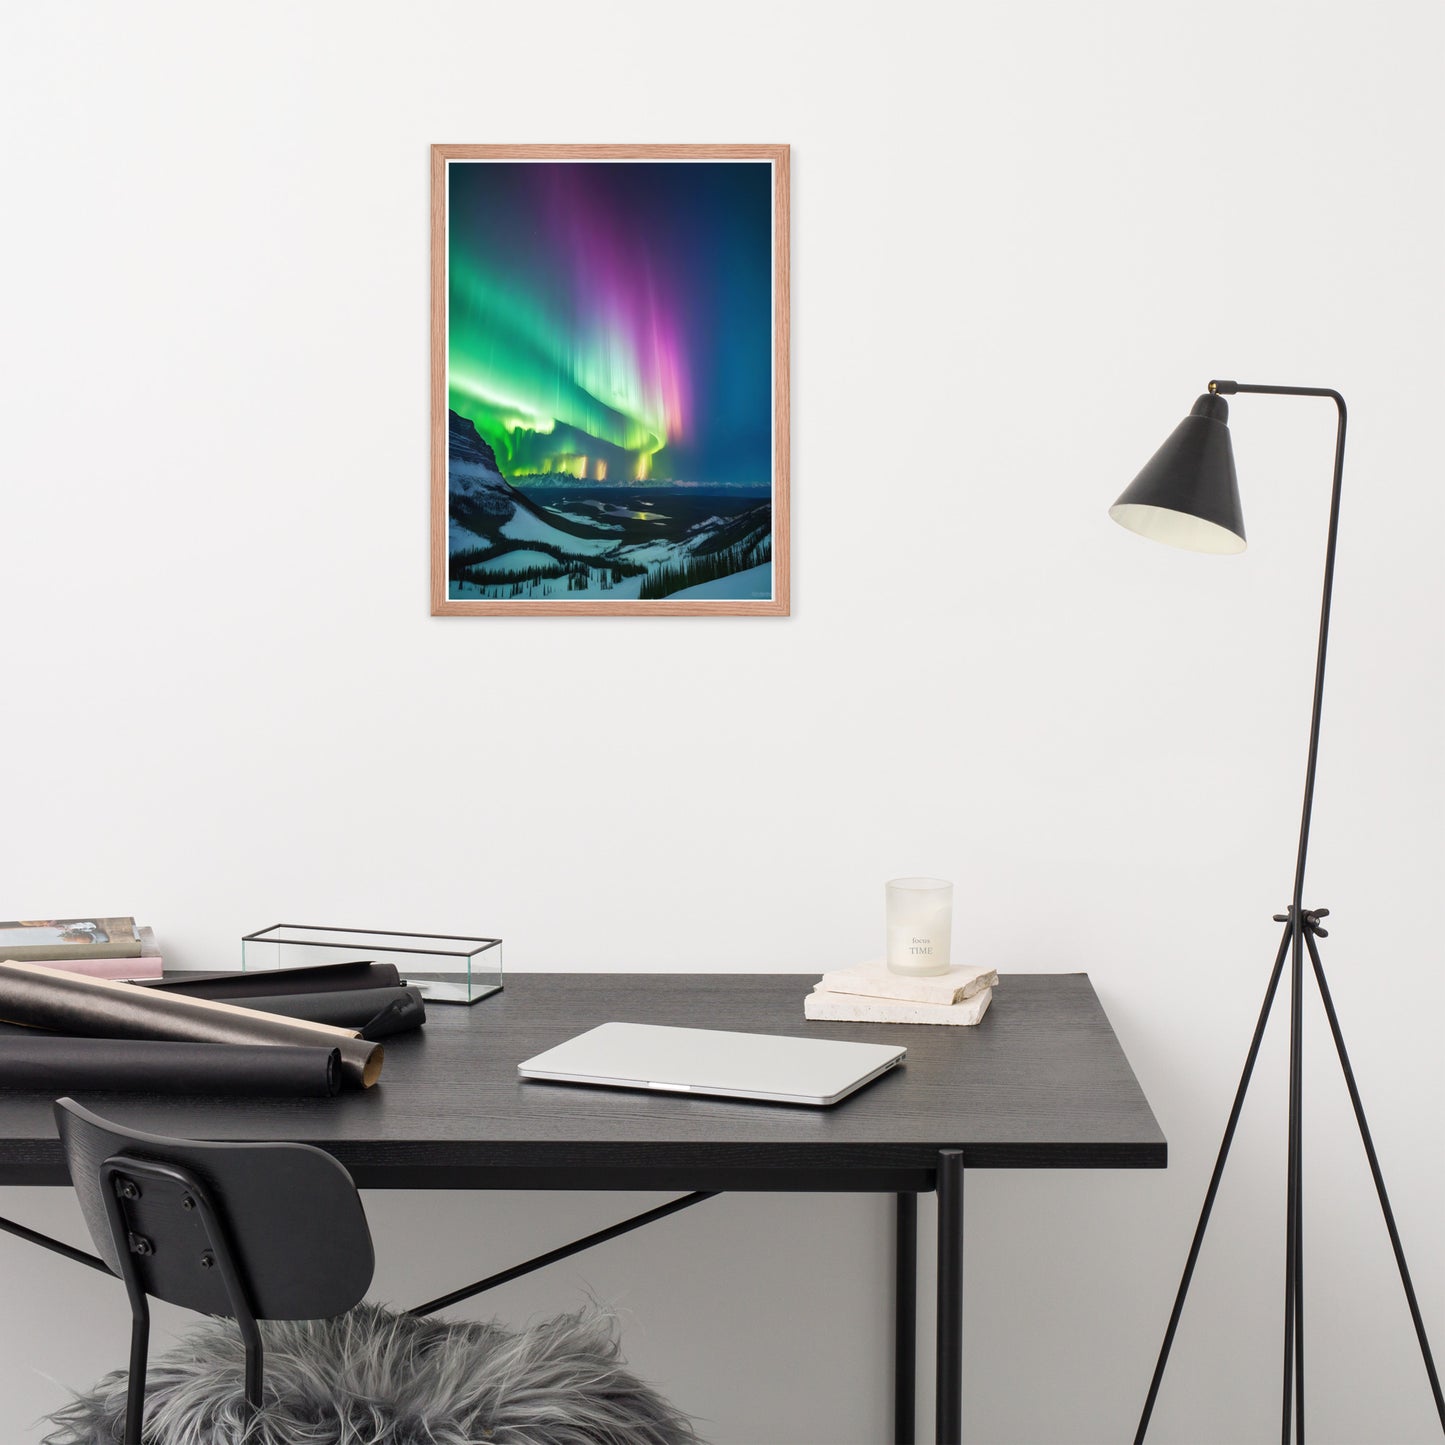 Enchanting Aurora Borealis Framed Posters - Multi Size Personalized Northern Light View - Modern Wall Art - Perfect Aurora Lovers Gift 9